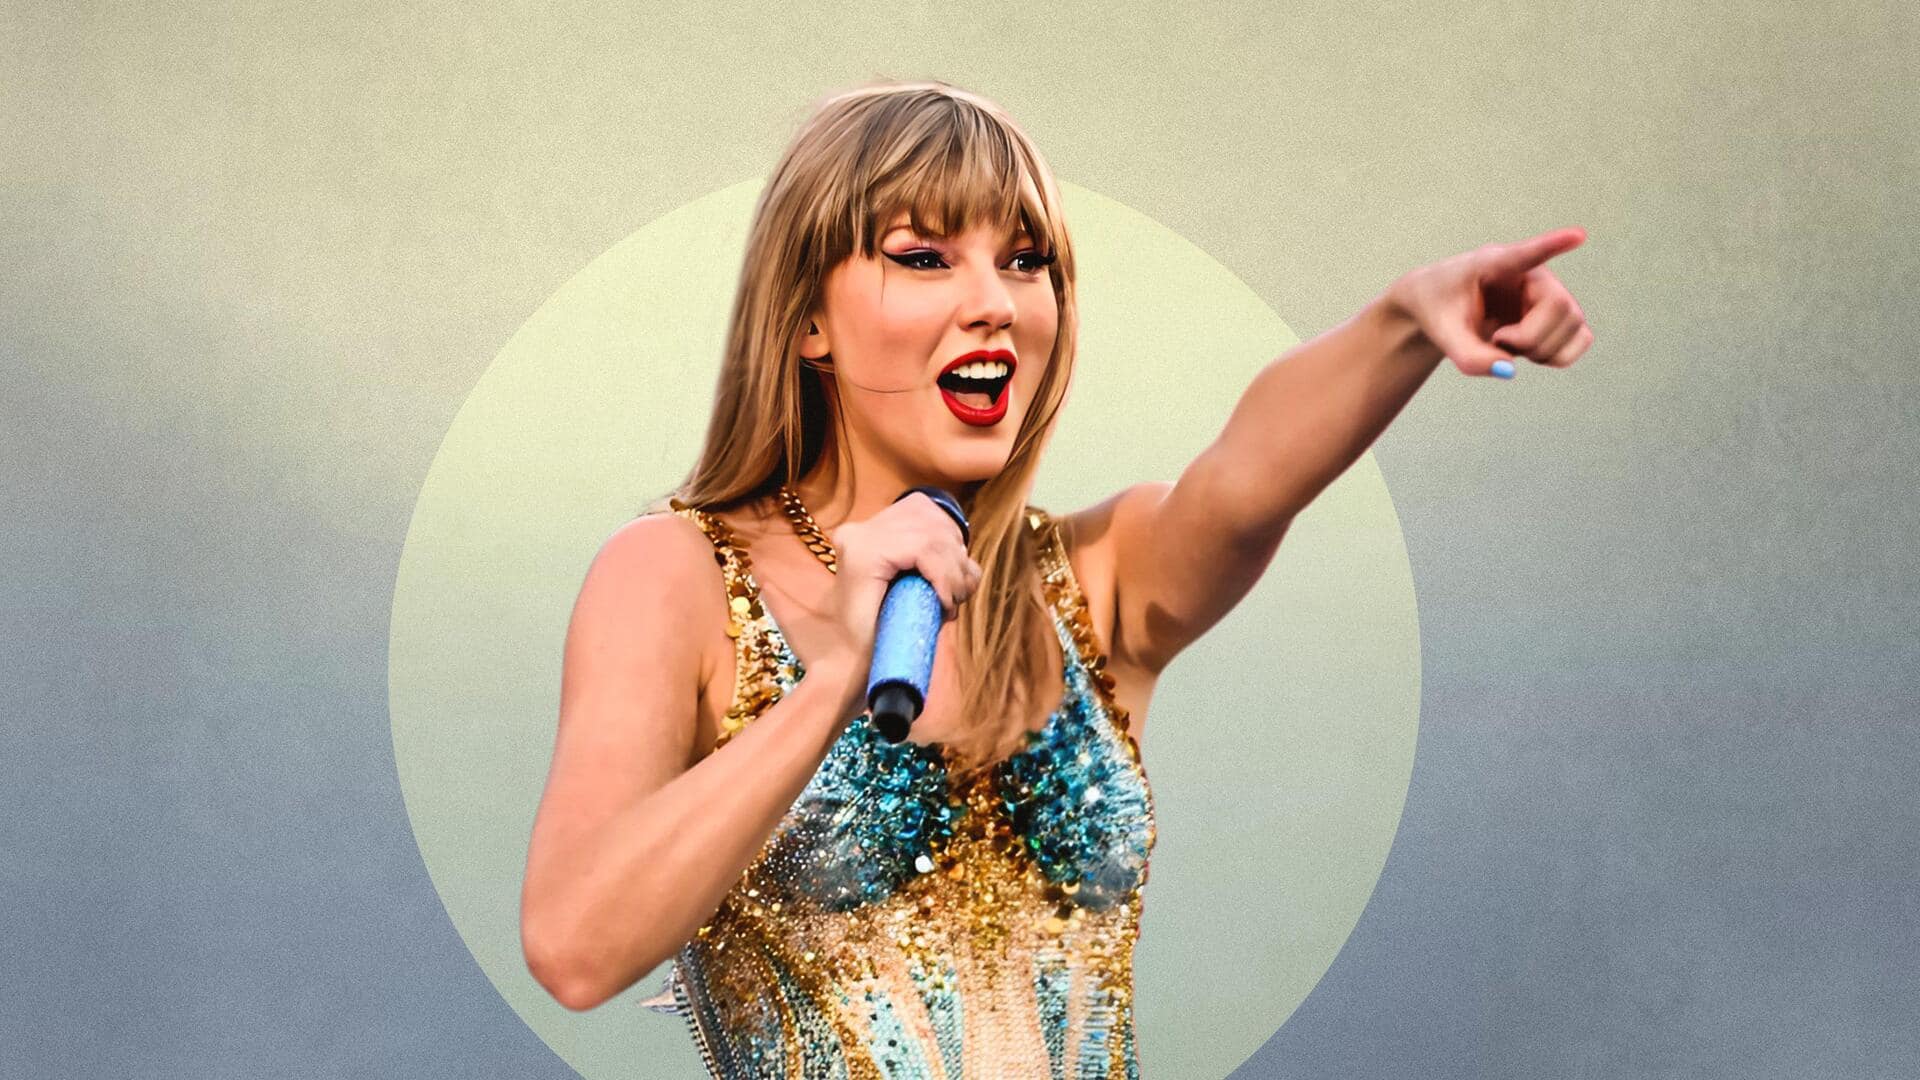 5 Taylor Swift songs you can't stop listening to